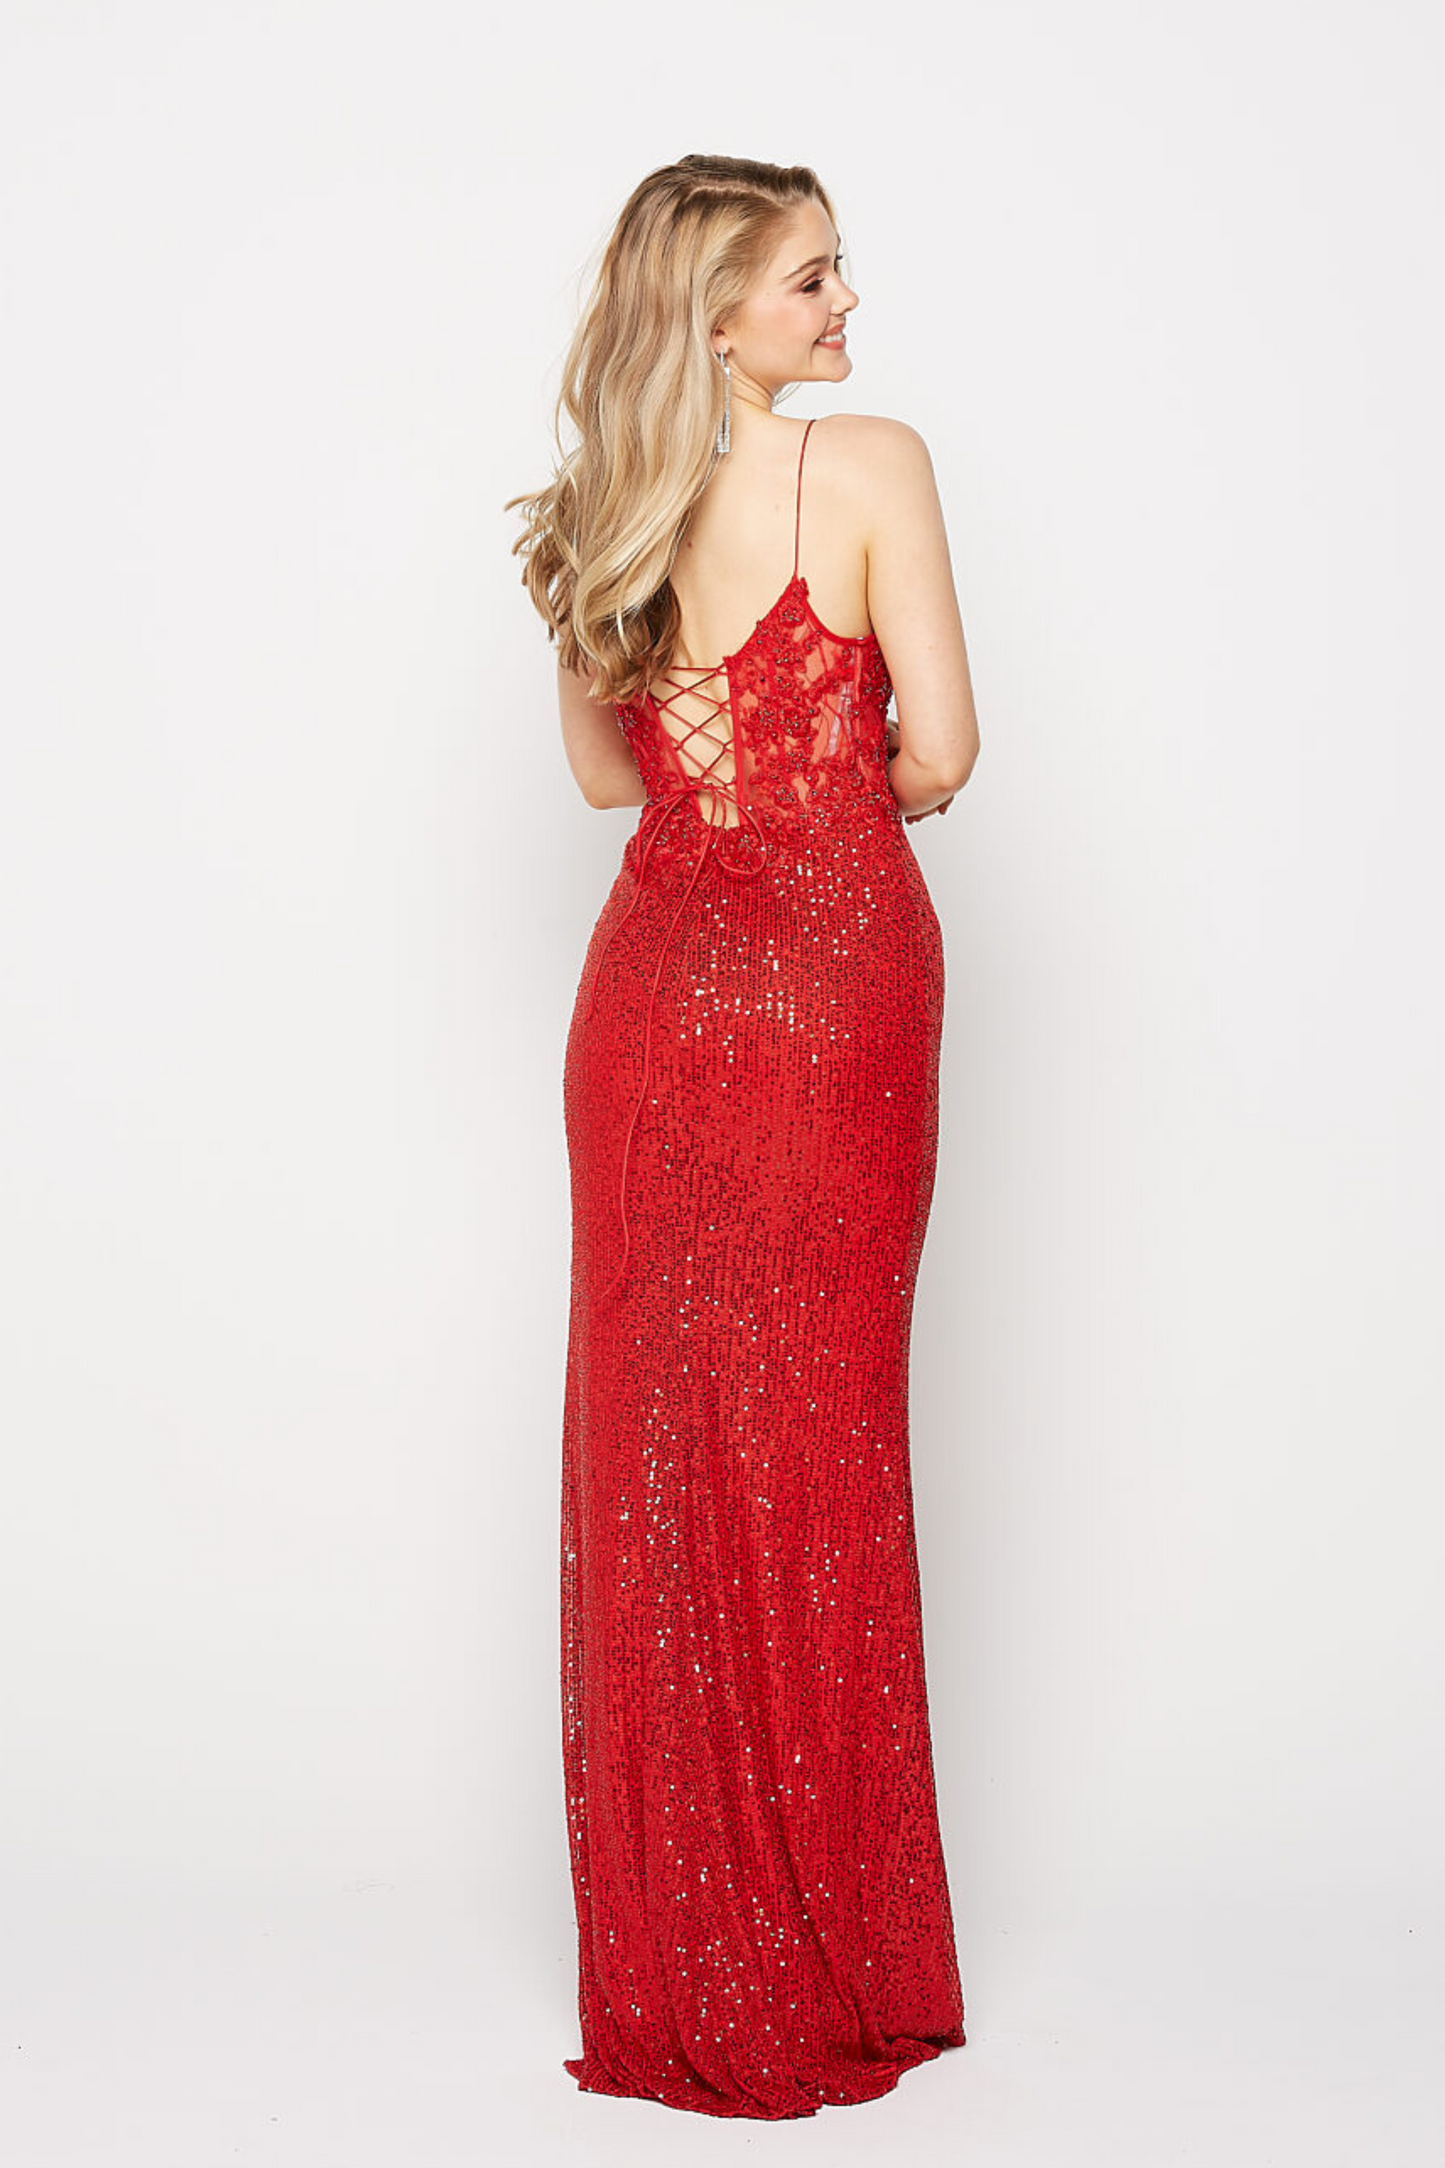 Tania Olsen slim fit lace formal dress in red sequins and lace